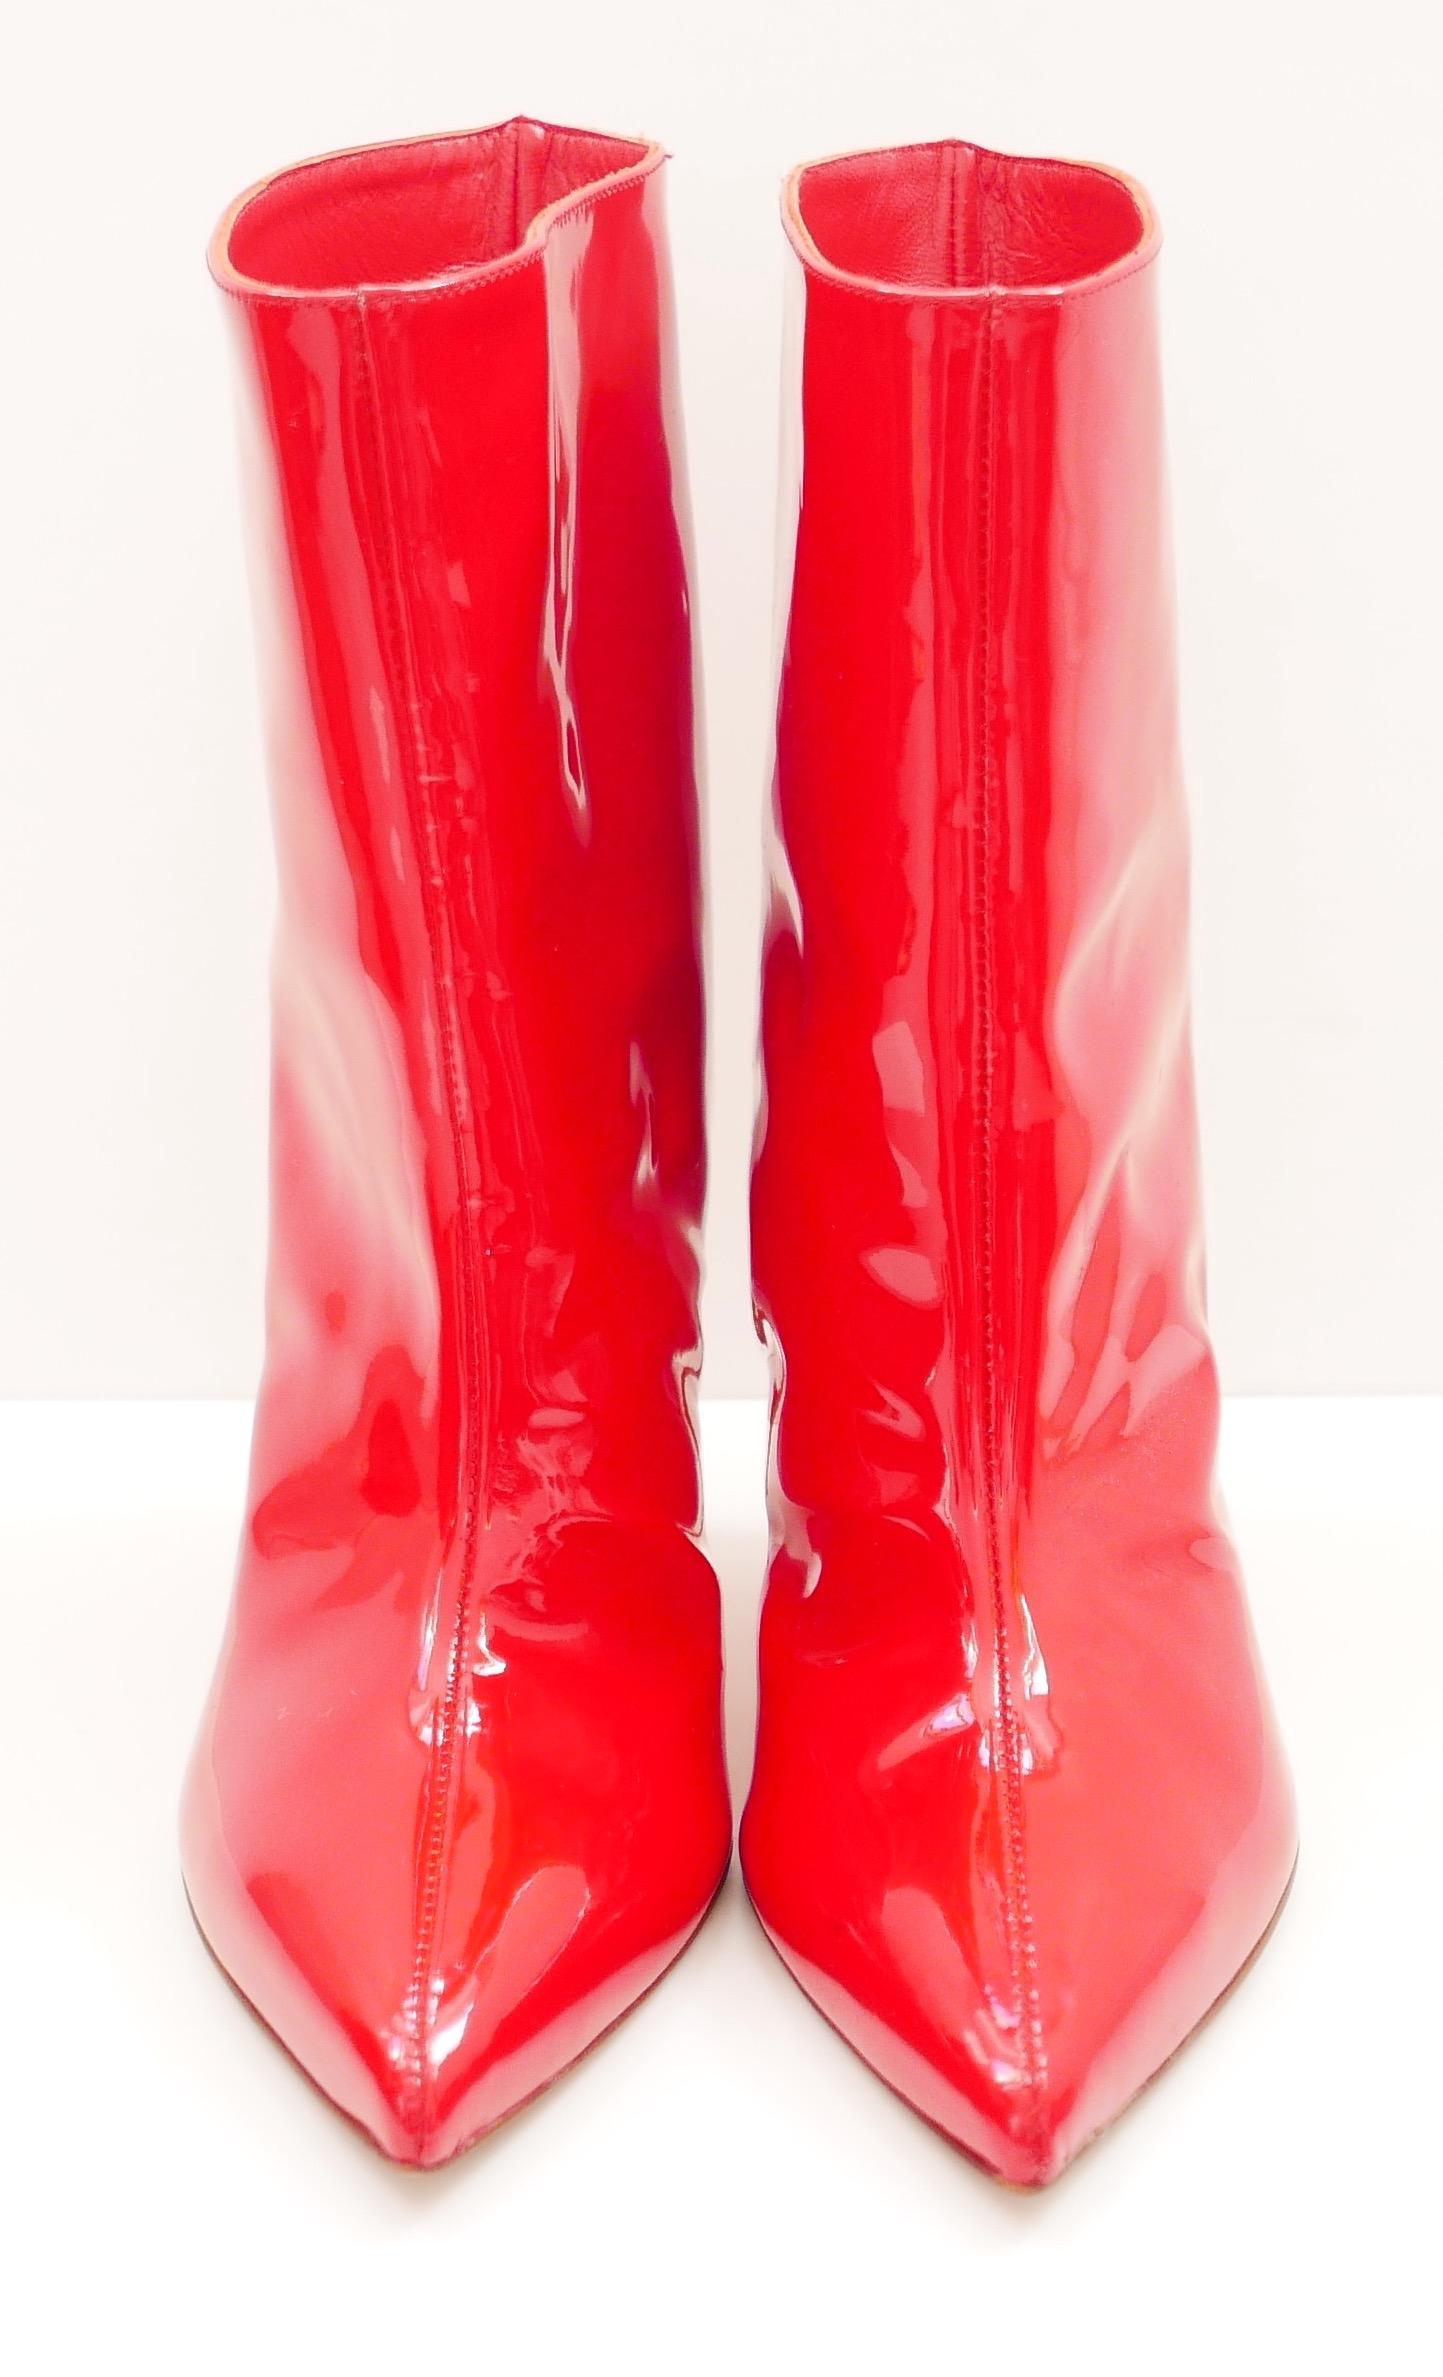 Super fierce Alexandre Vauthier Raquel 105 ankle boots. bought for £620 and worn once inside. Come with dustbag. Made from super glossy bright red patent leather, they have pointed toes, wide tops and stilettos heels. Have small, barely visible